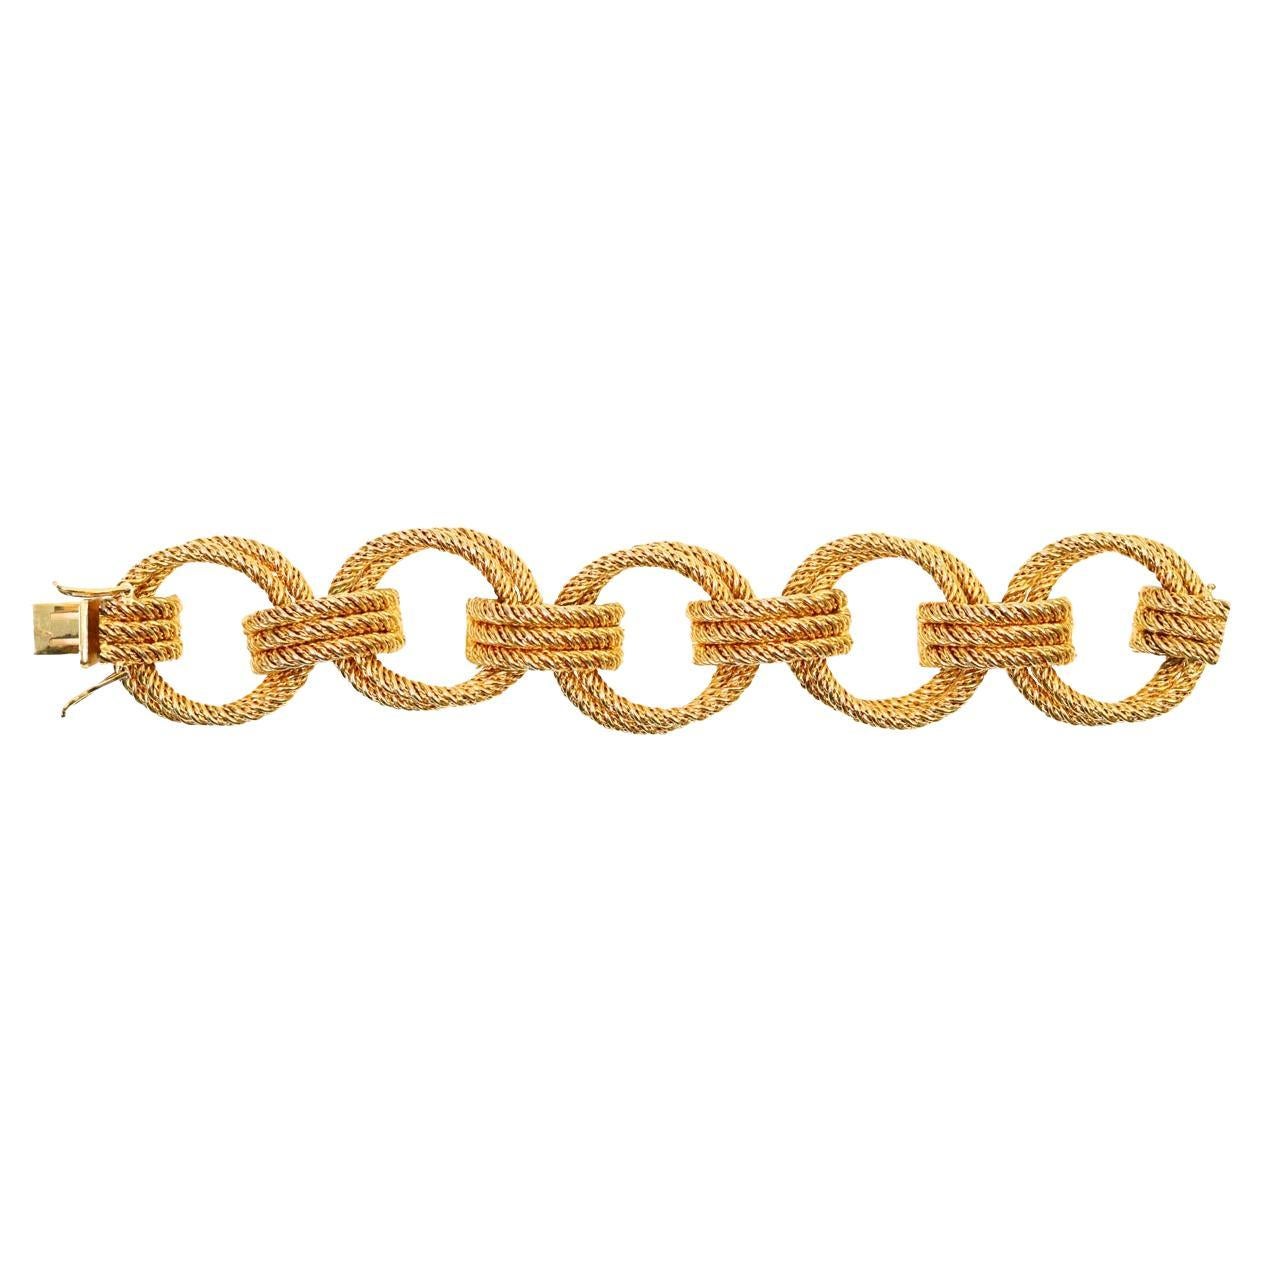 Vintage Grosse Germany Rope Link Bracelet Circa 1967. Double Round rigid links make up this bracelet with three links going around in the middle to attach it.  It looks great and would look wonderful with anything.  A classic basic.